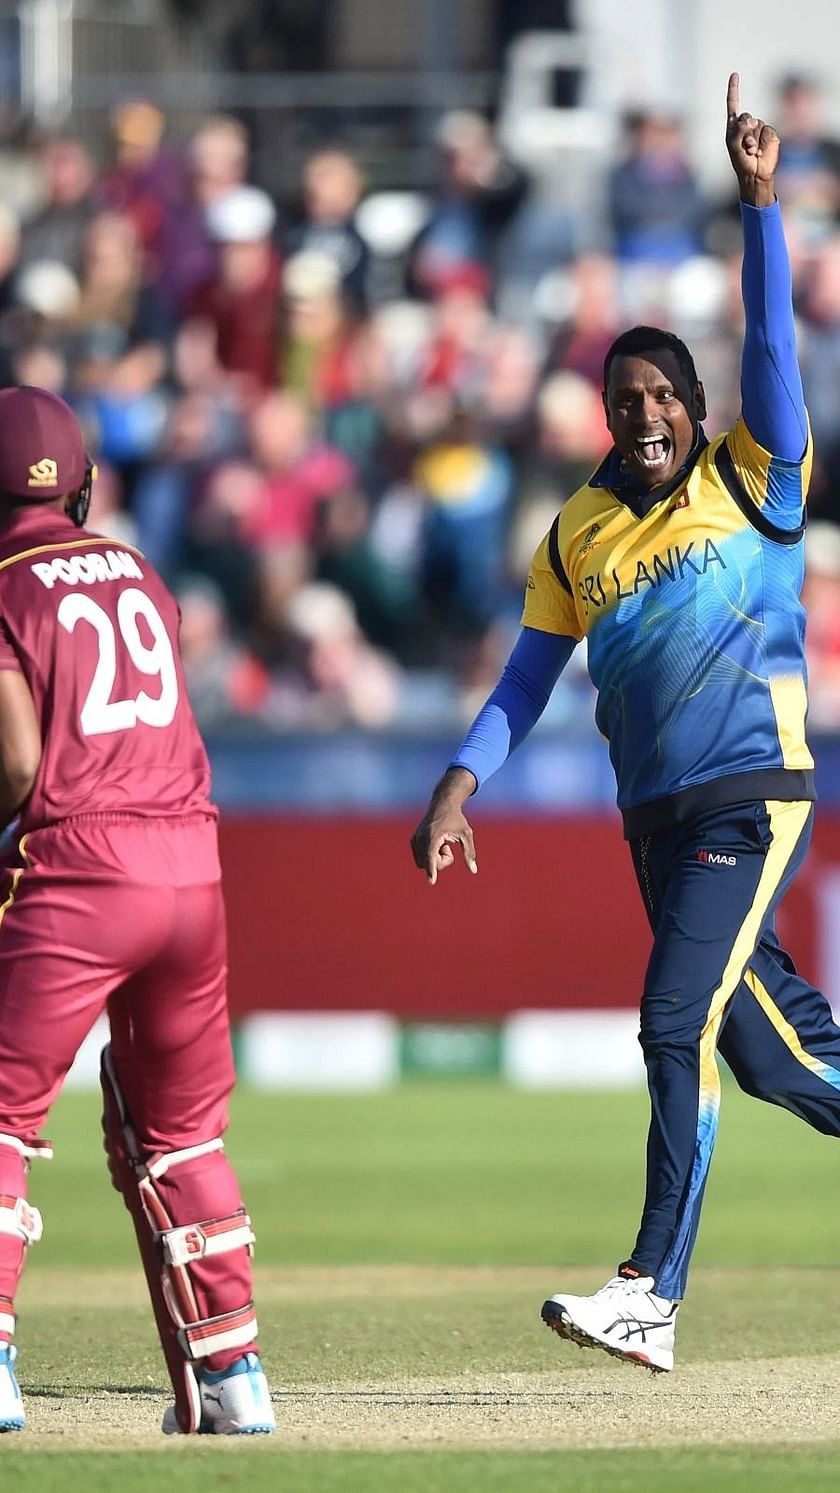 Sri Lanka's Angelo Mathews to return home from West Indies tour